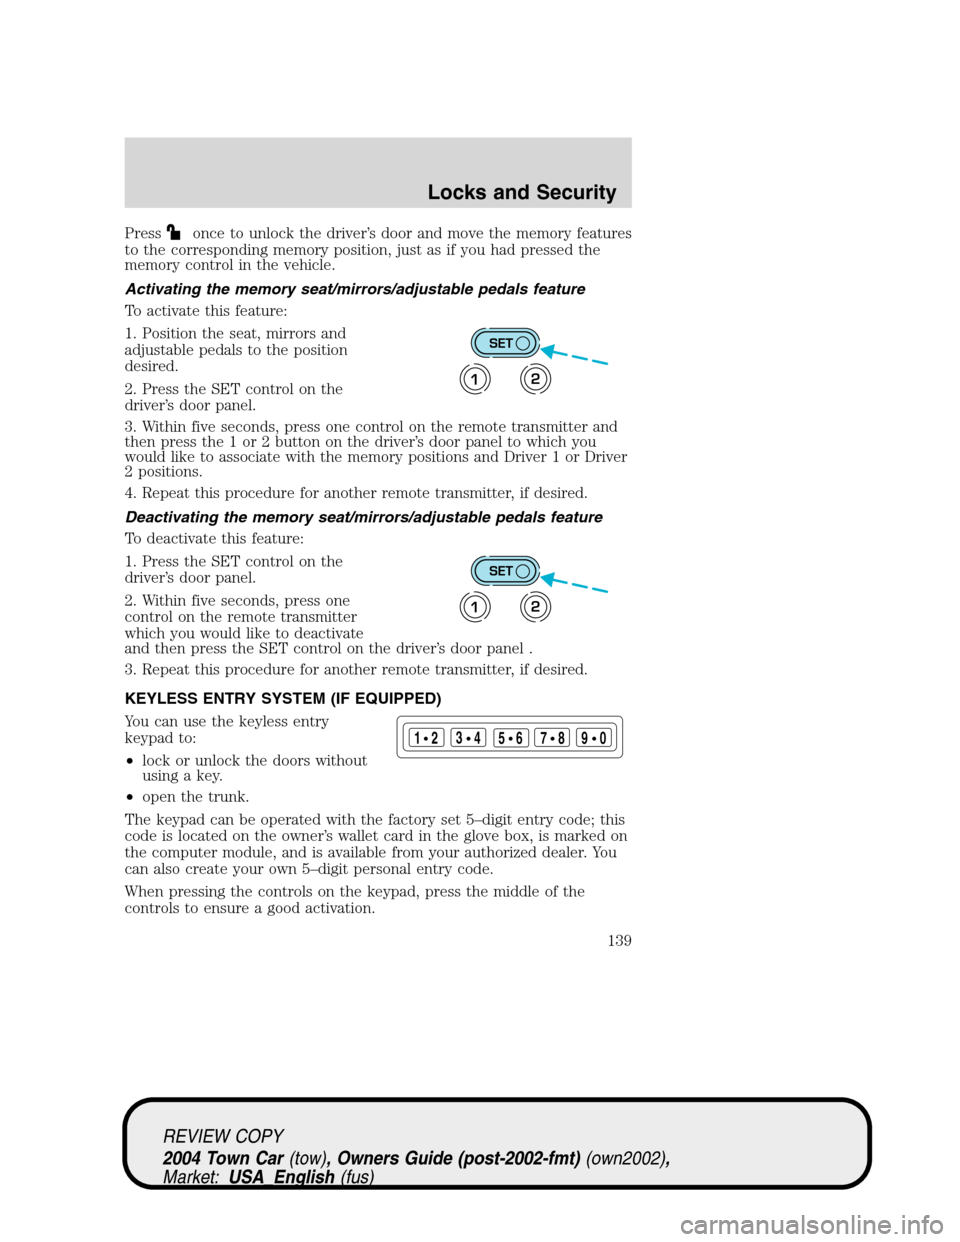 LINCOLN TOWN CAR 2004  Owners Manual Pressonce to unlock the driver’s door and move the memory features
to the corresponding memory position, just as if you had pressed the
memory control in the vehicle.
Activating the memory seat/mirr